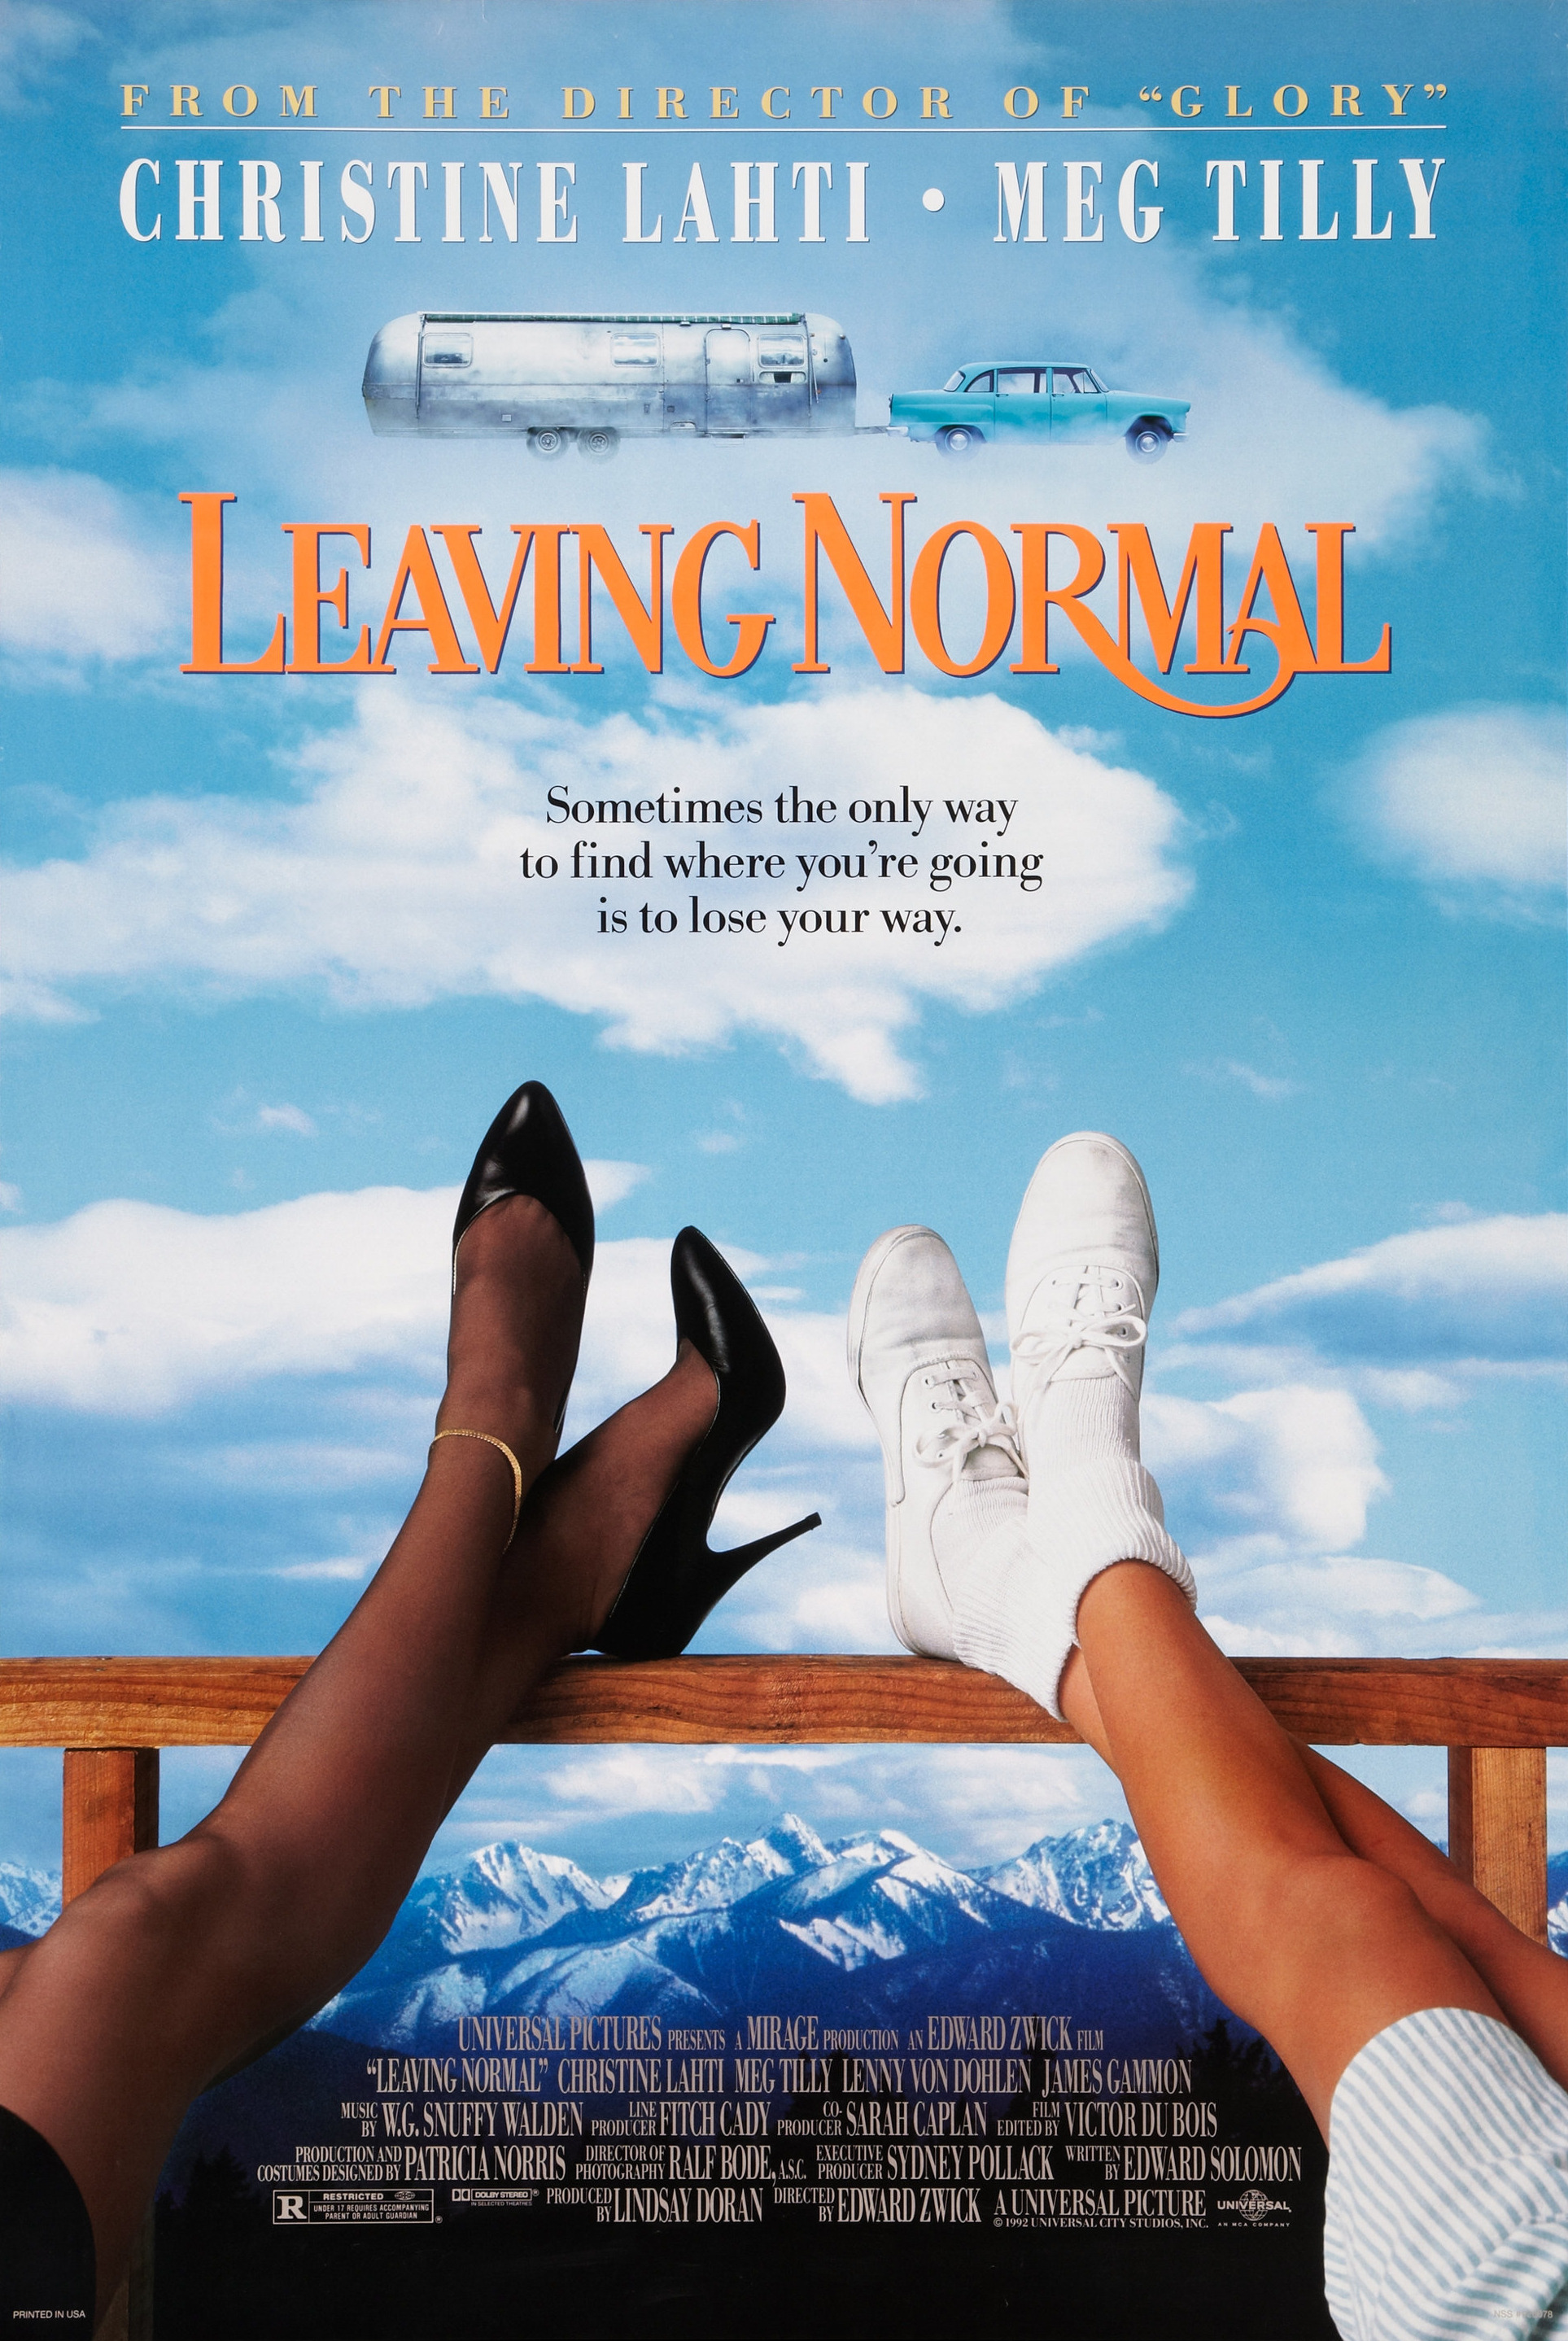 Mega Sized Movie Poster Image for Leaving Normal 